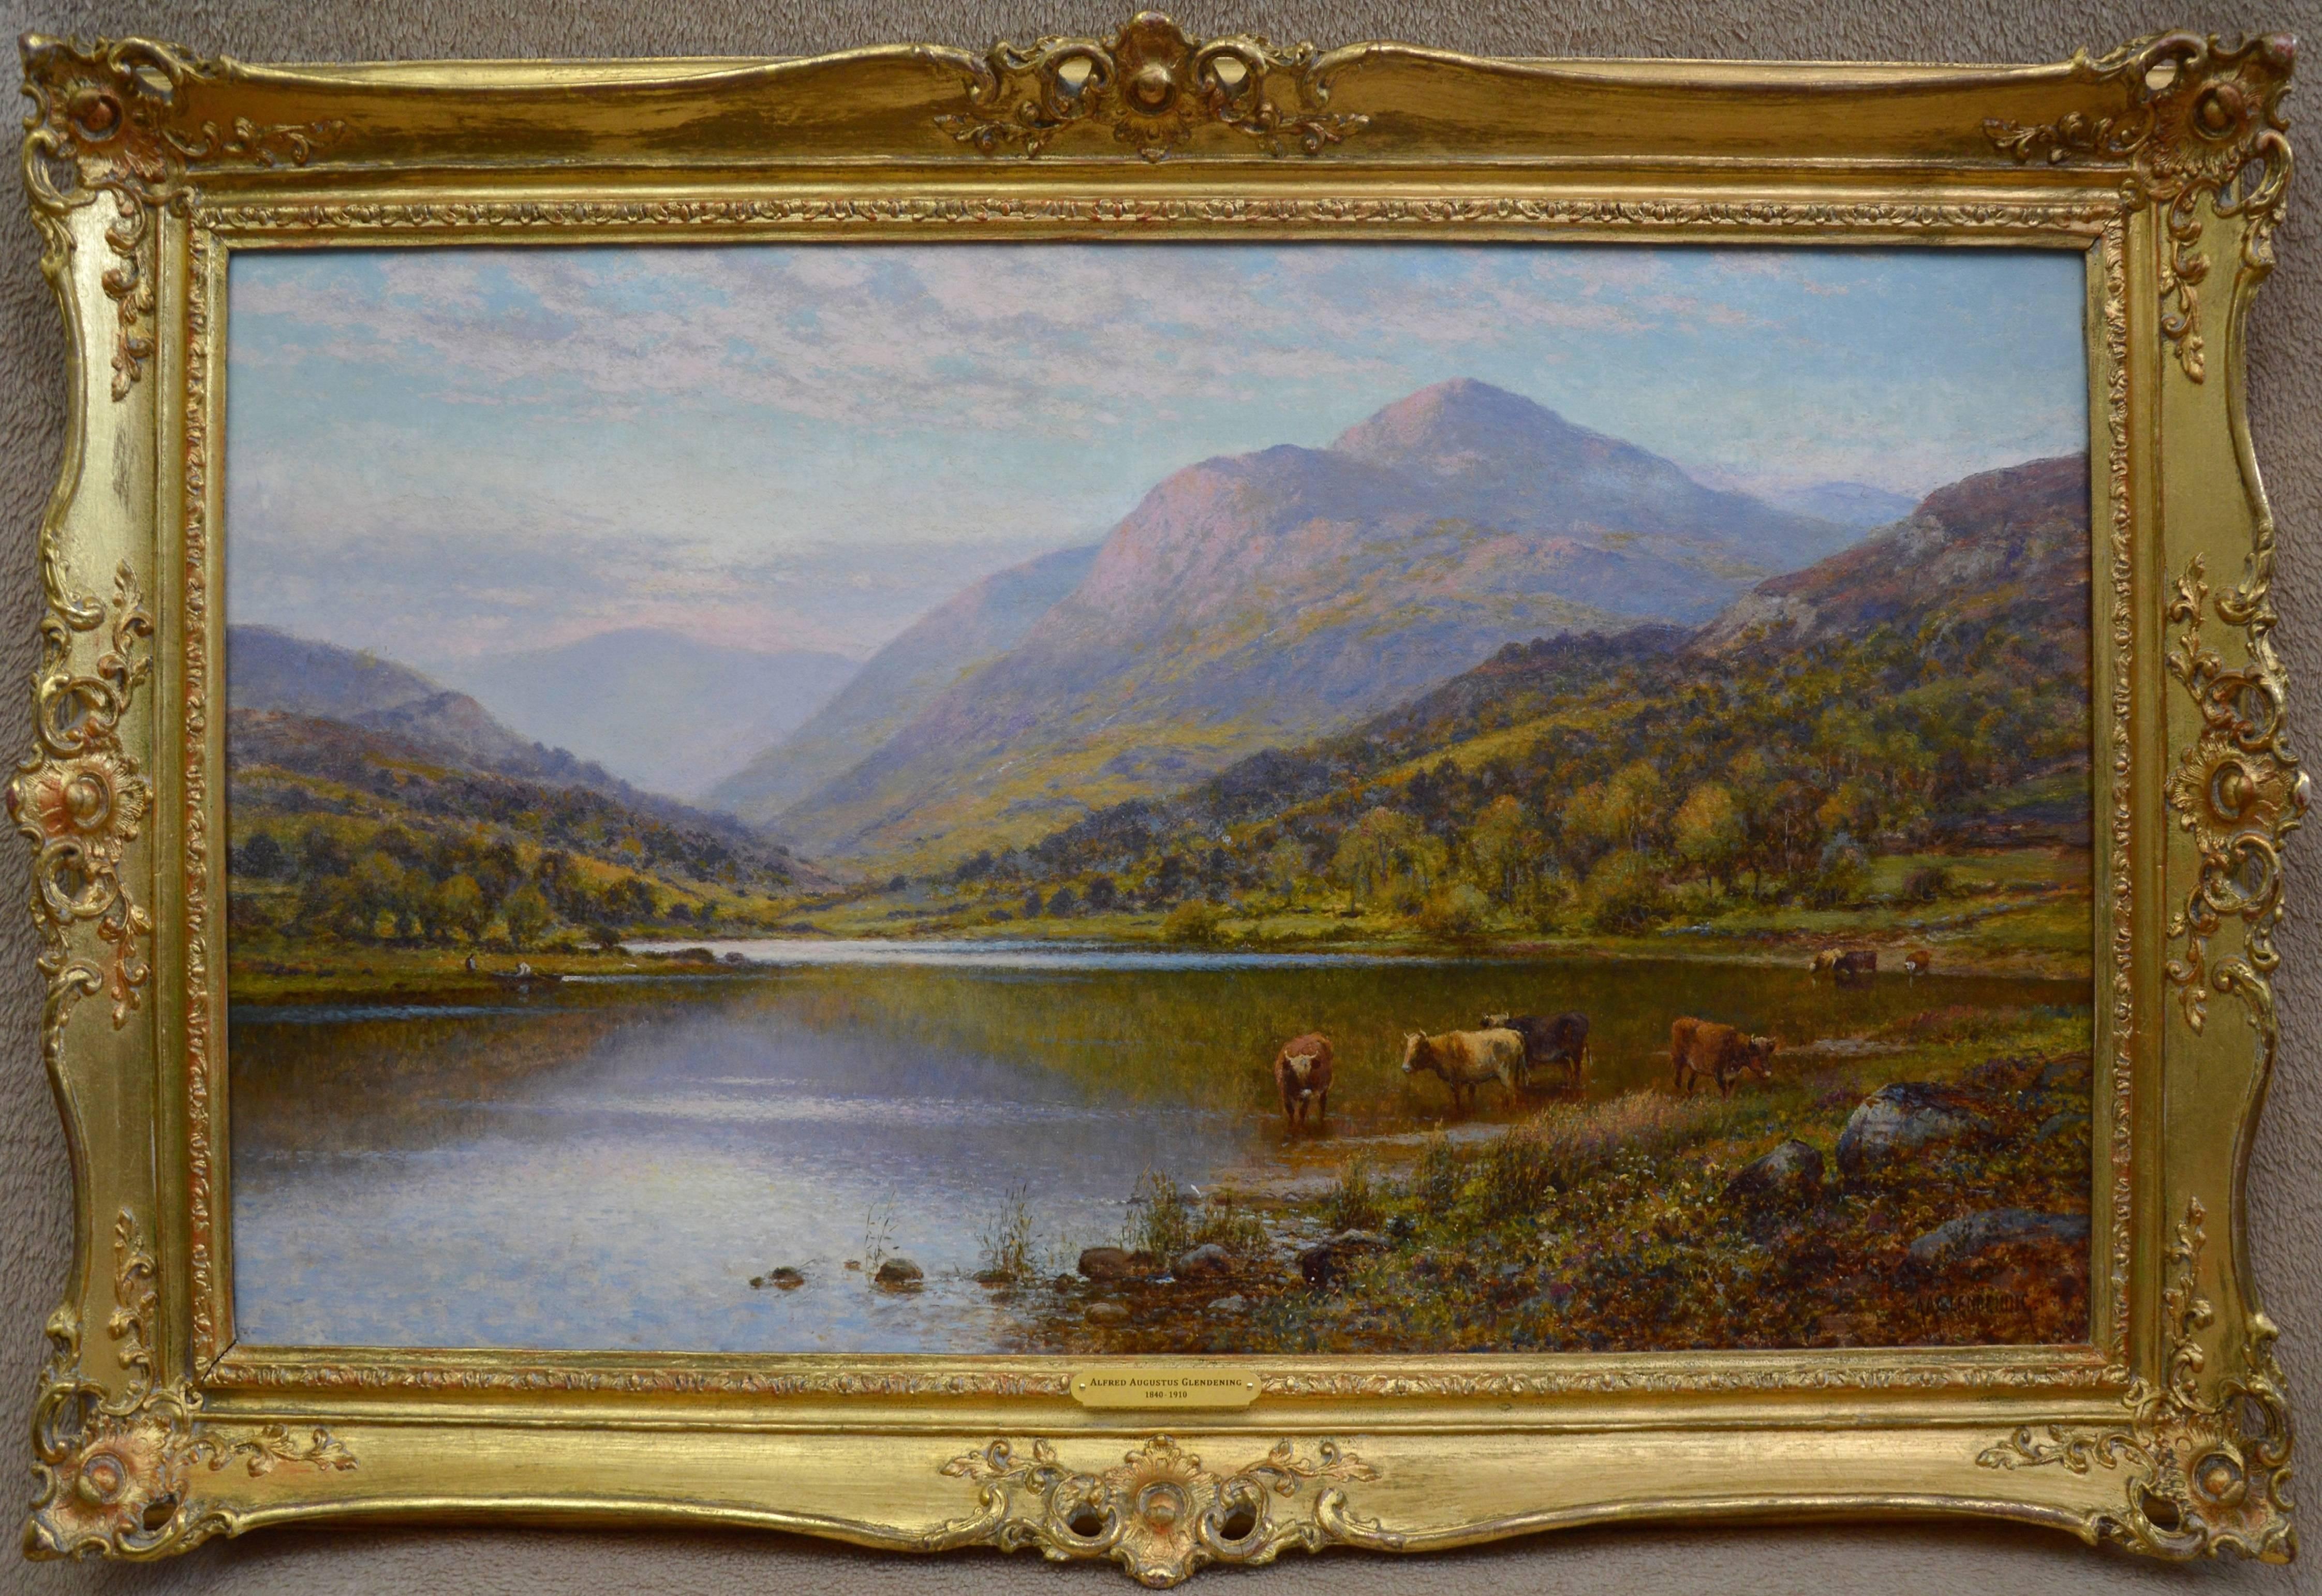 Alfred Augustus Glendening Snr Animal Painting - Scottish Landscape with Highland Cattle - 19th Century Oil Painting - Glendening